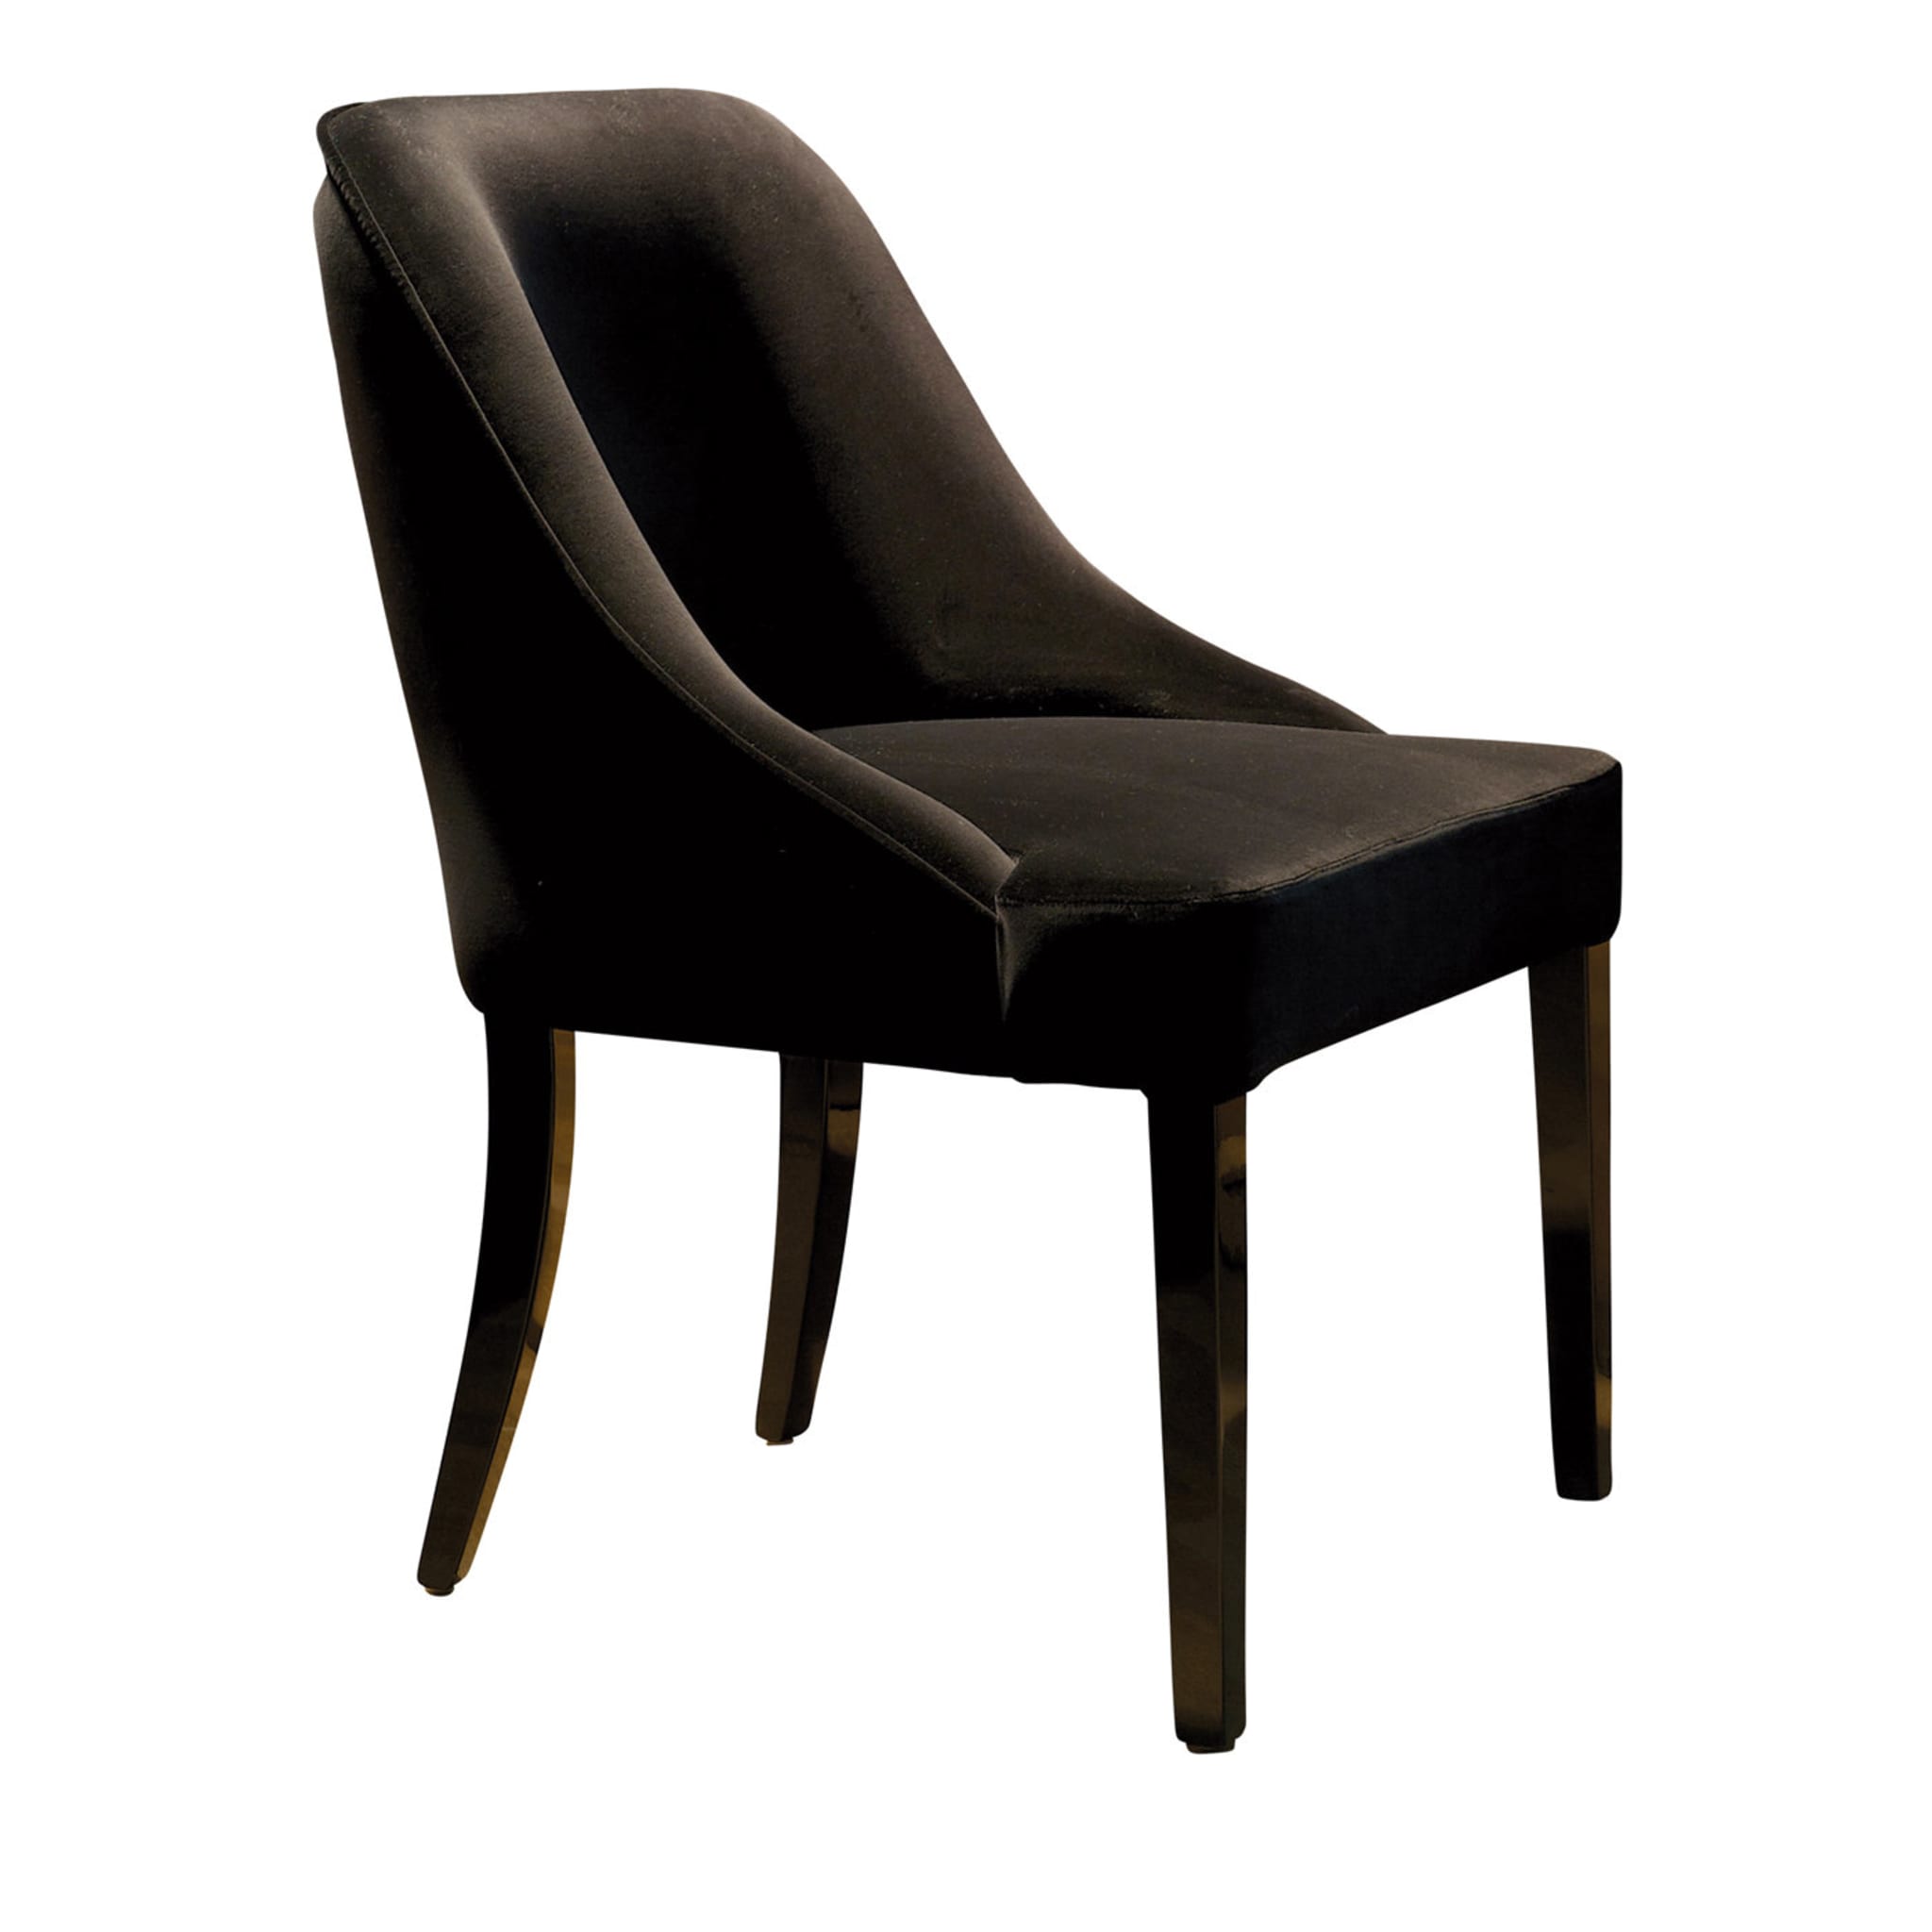 Vicky Gray Dining Chair - Main view